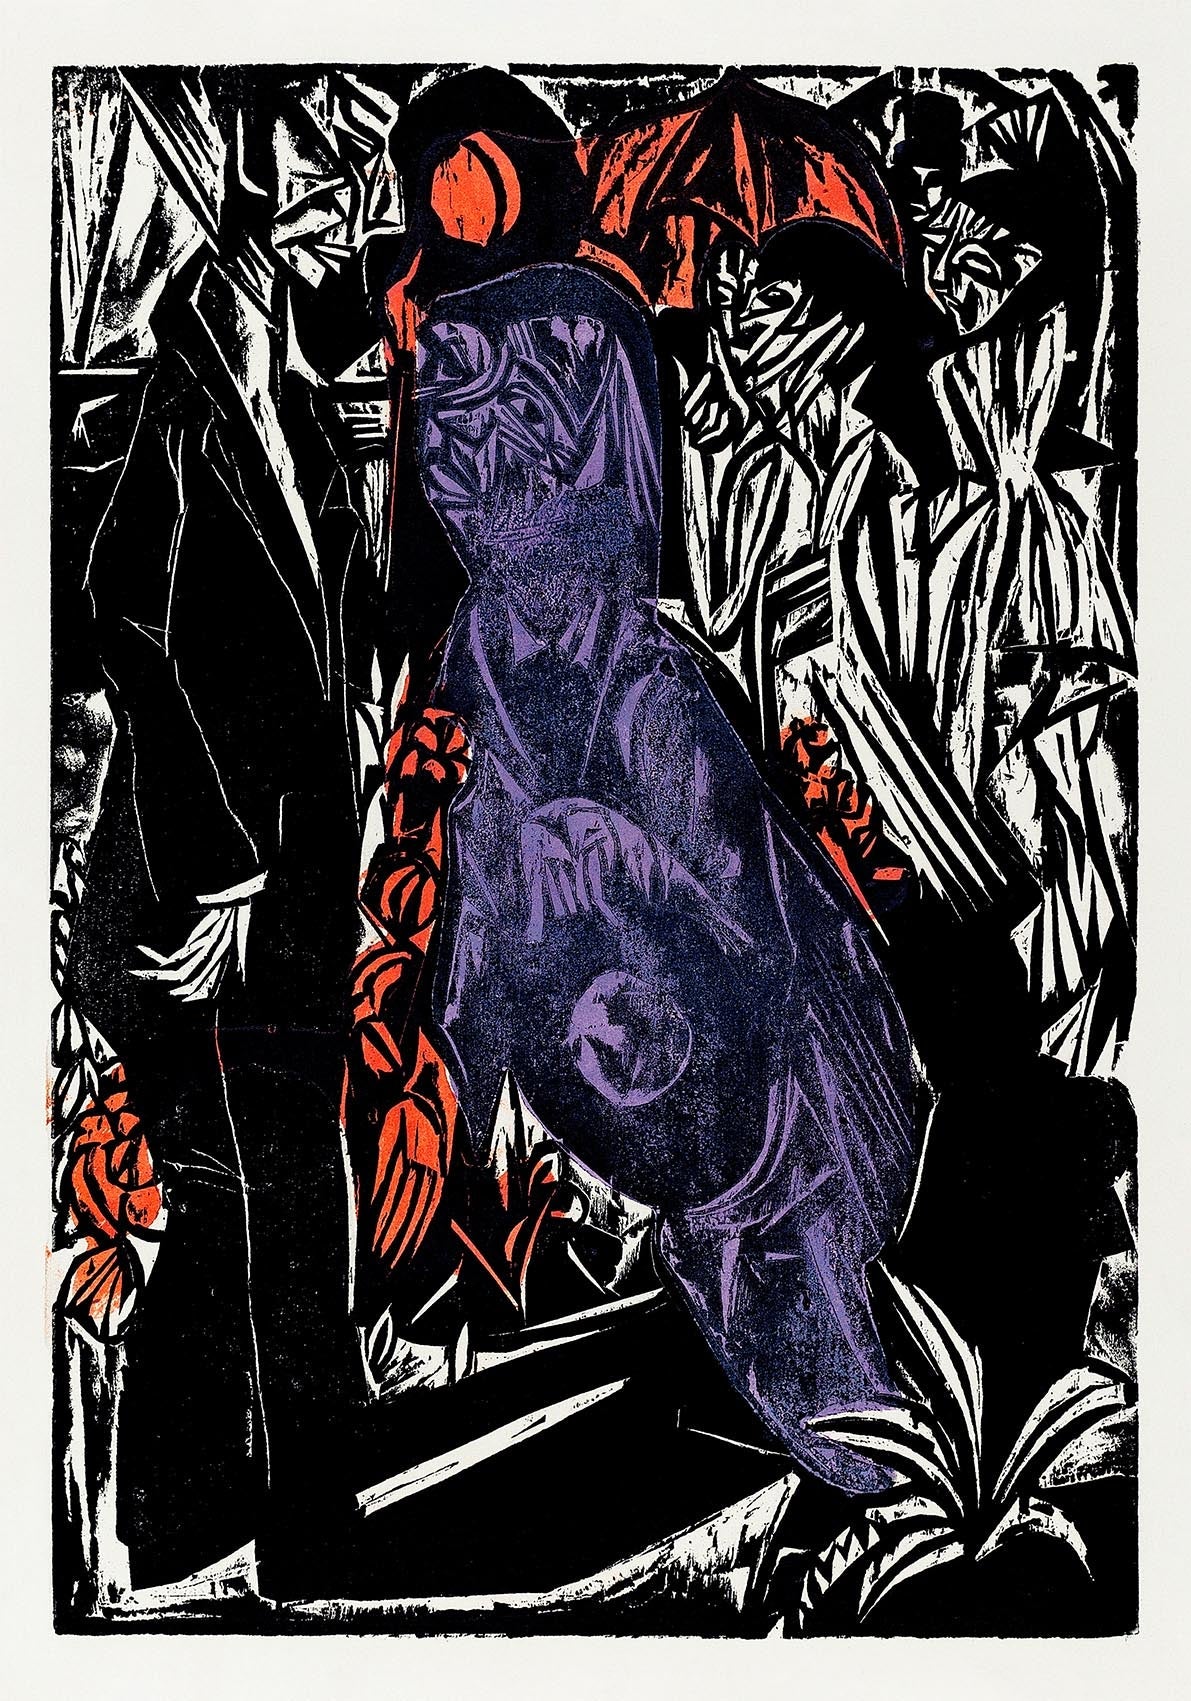 The Sale of His Shadow by Ernst Kirchner